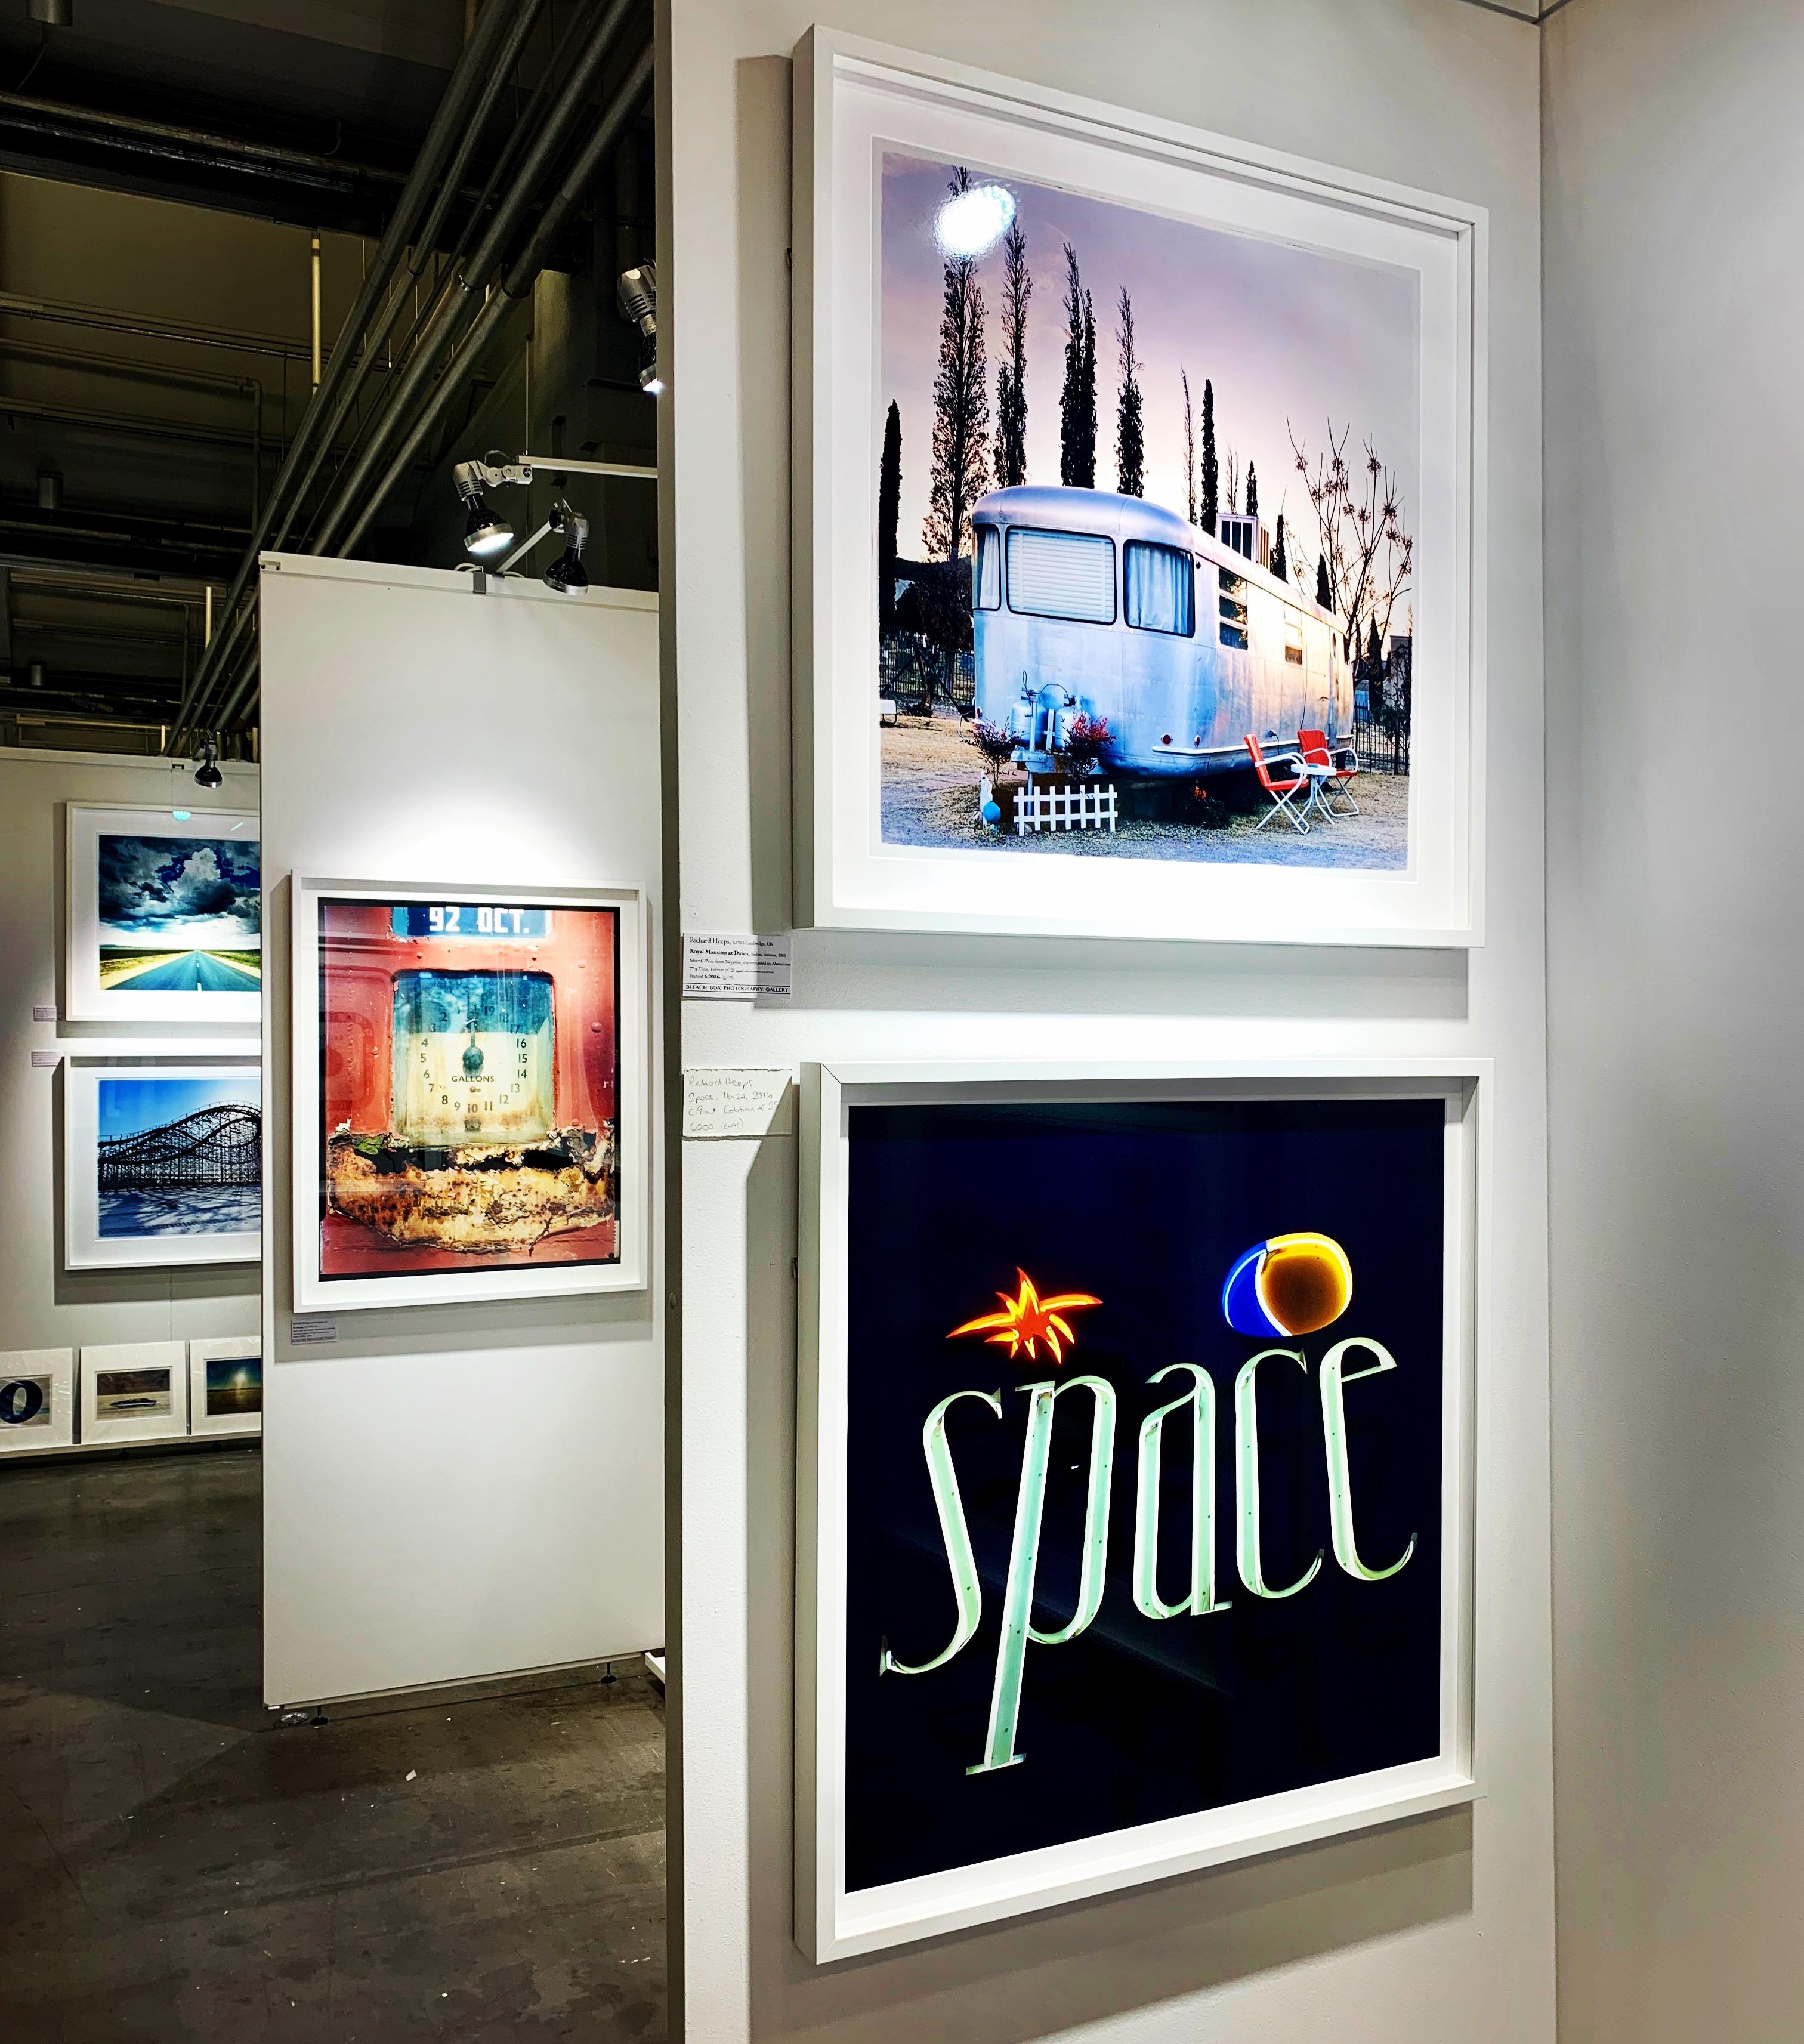 Space, Ibiza, the Balearic Islands - Contemporary Colour Sign Photography - Black Print by Richard Heeps